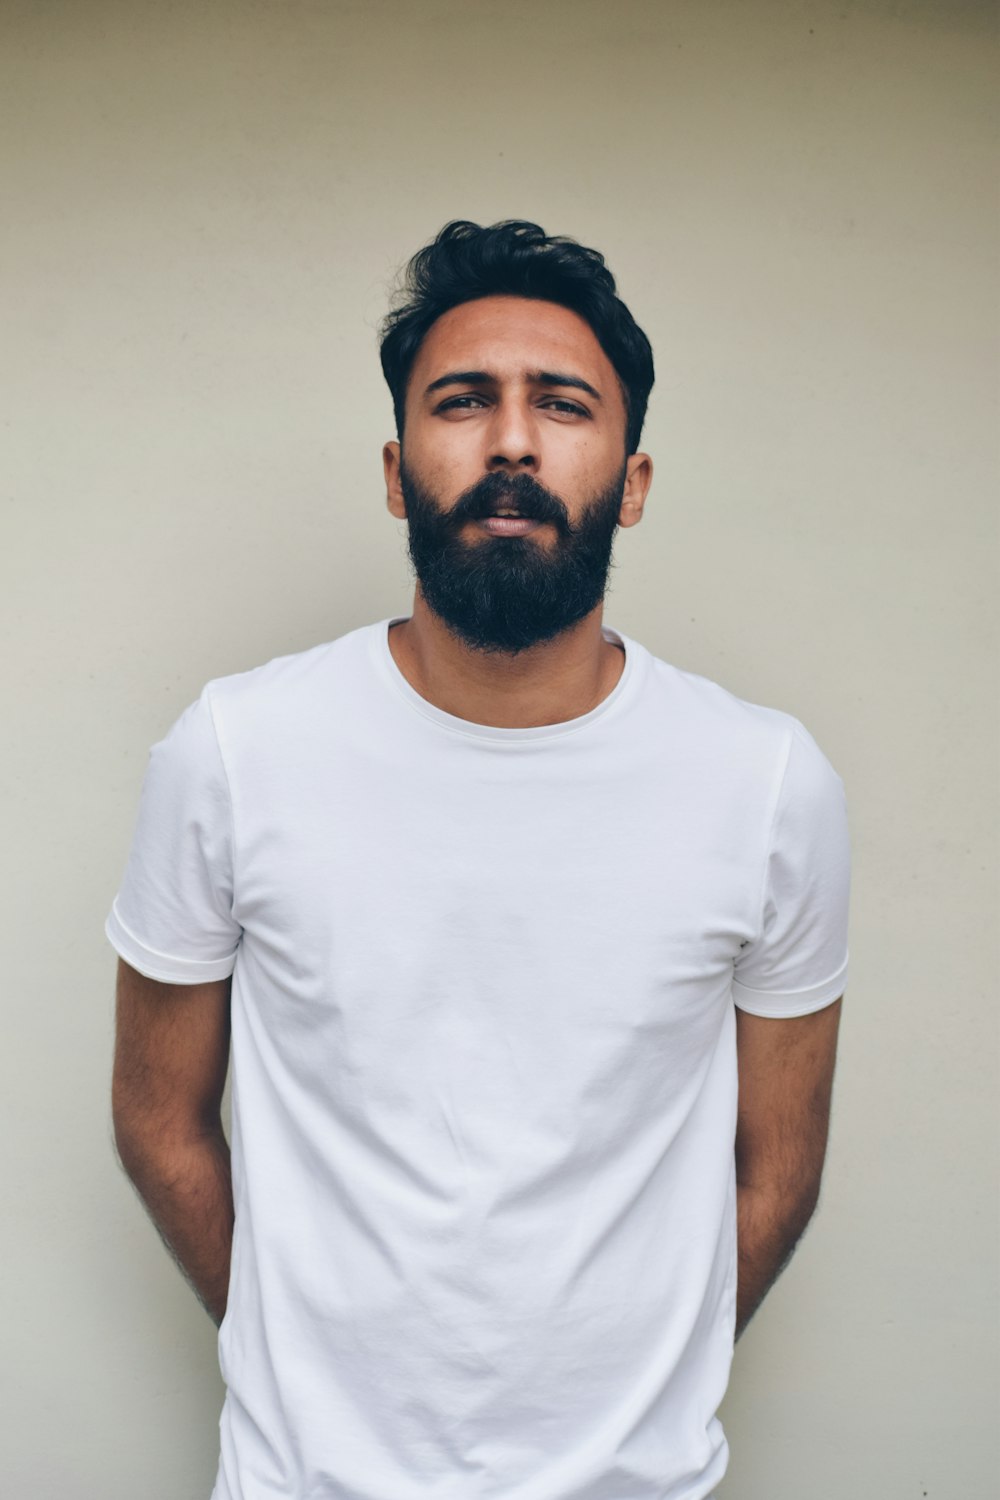 20+ T Shirt Pictures [HQ] | Download Free Images & Stock Photos on Unsplash